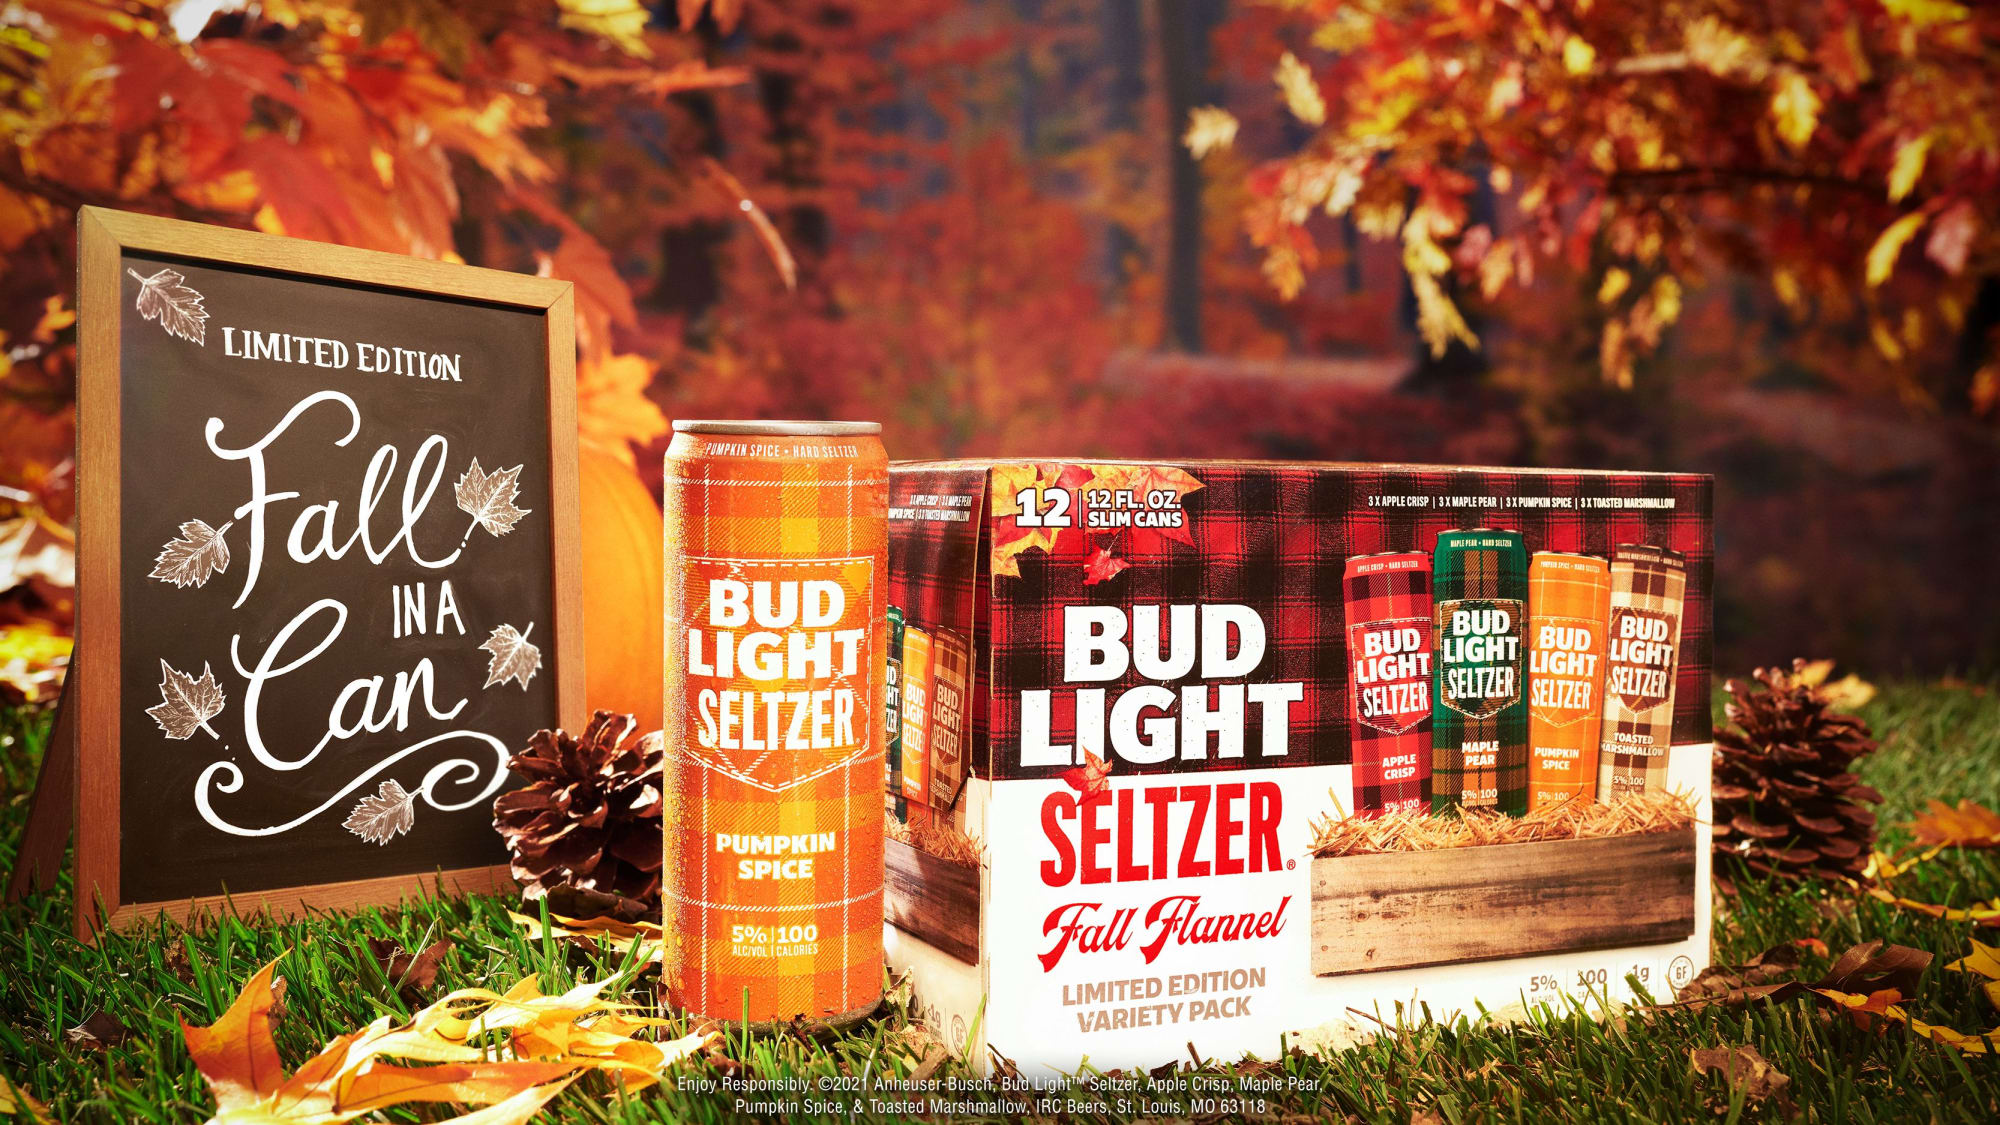 Bud Light Seltzer Fall Flannel Variety pack is spicing up fall cocktail